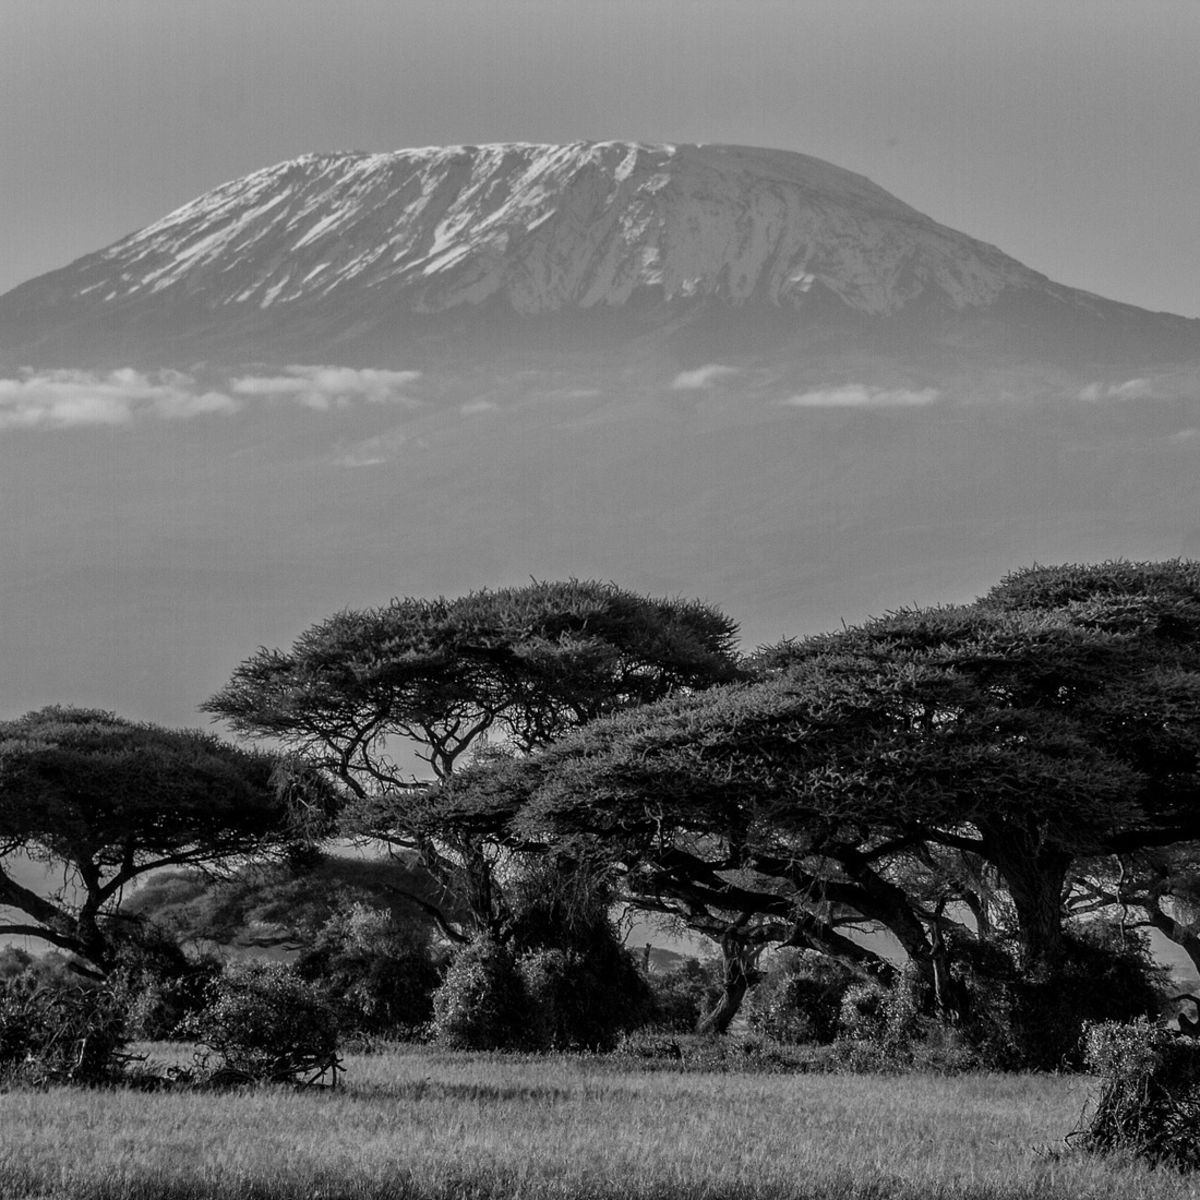 View of Mt Kilimanjaro at sunset from plains